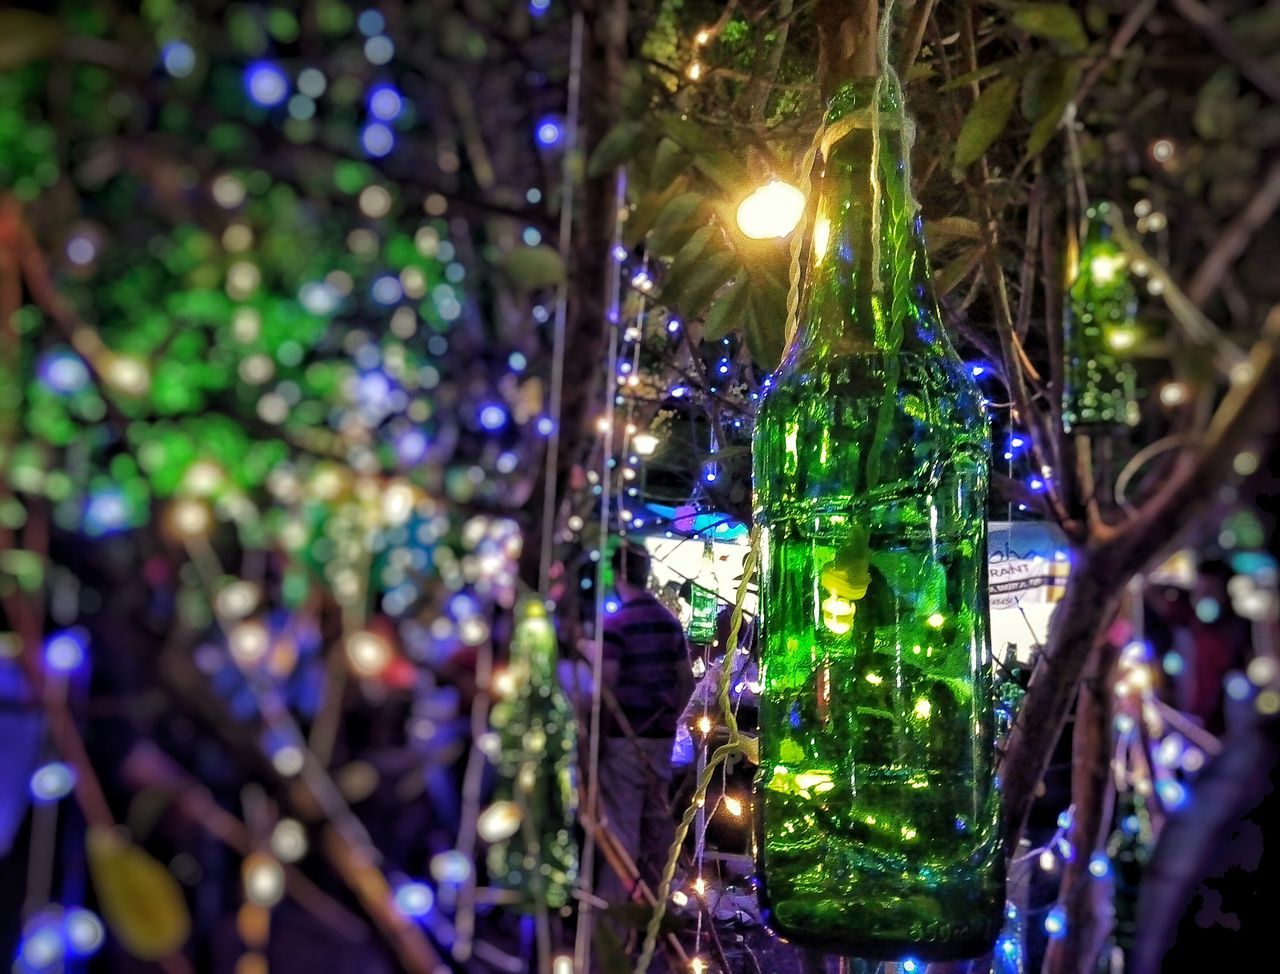 illuminated, focus on foreground, close-up, decoration, lighting equipment, green color, hanging, lens flare, reflection, christmas decoration, celebration, night, selective focus, glass - material, transparent, water, outdoors, no people, shiny, christmas